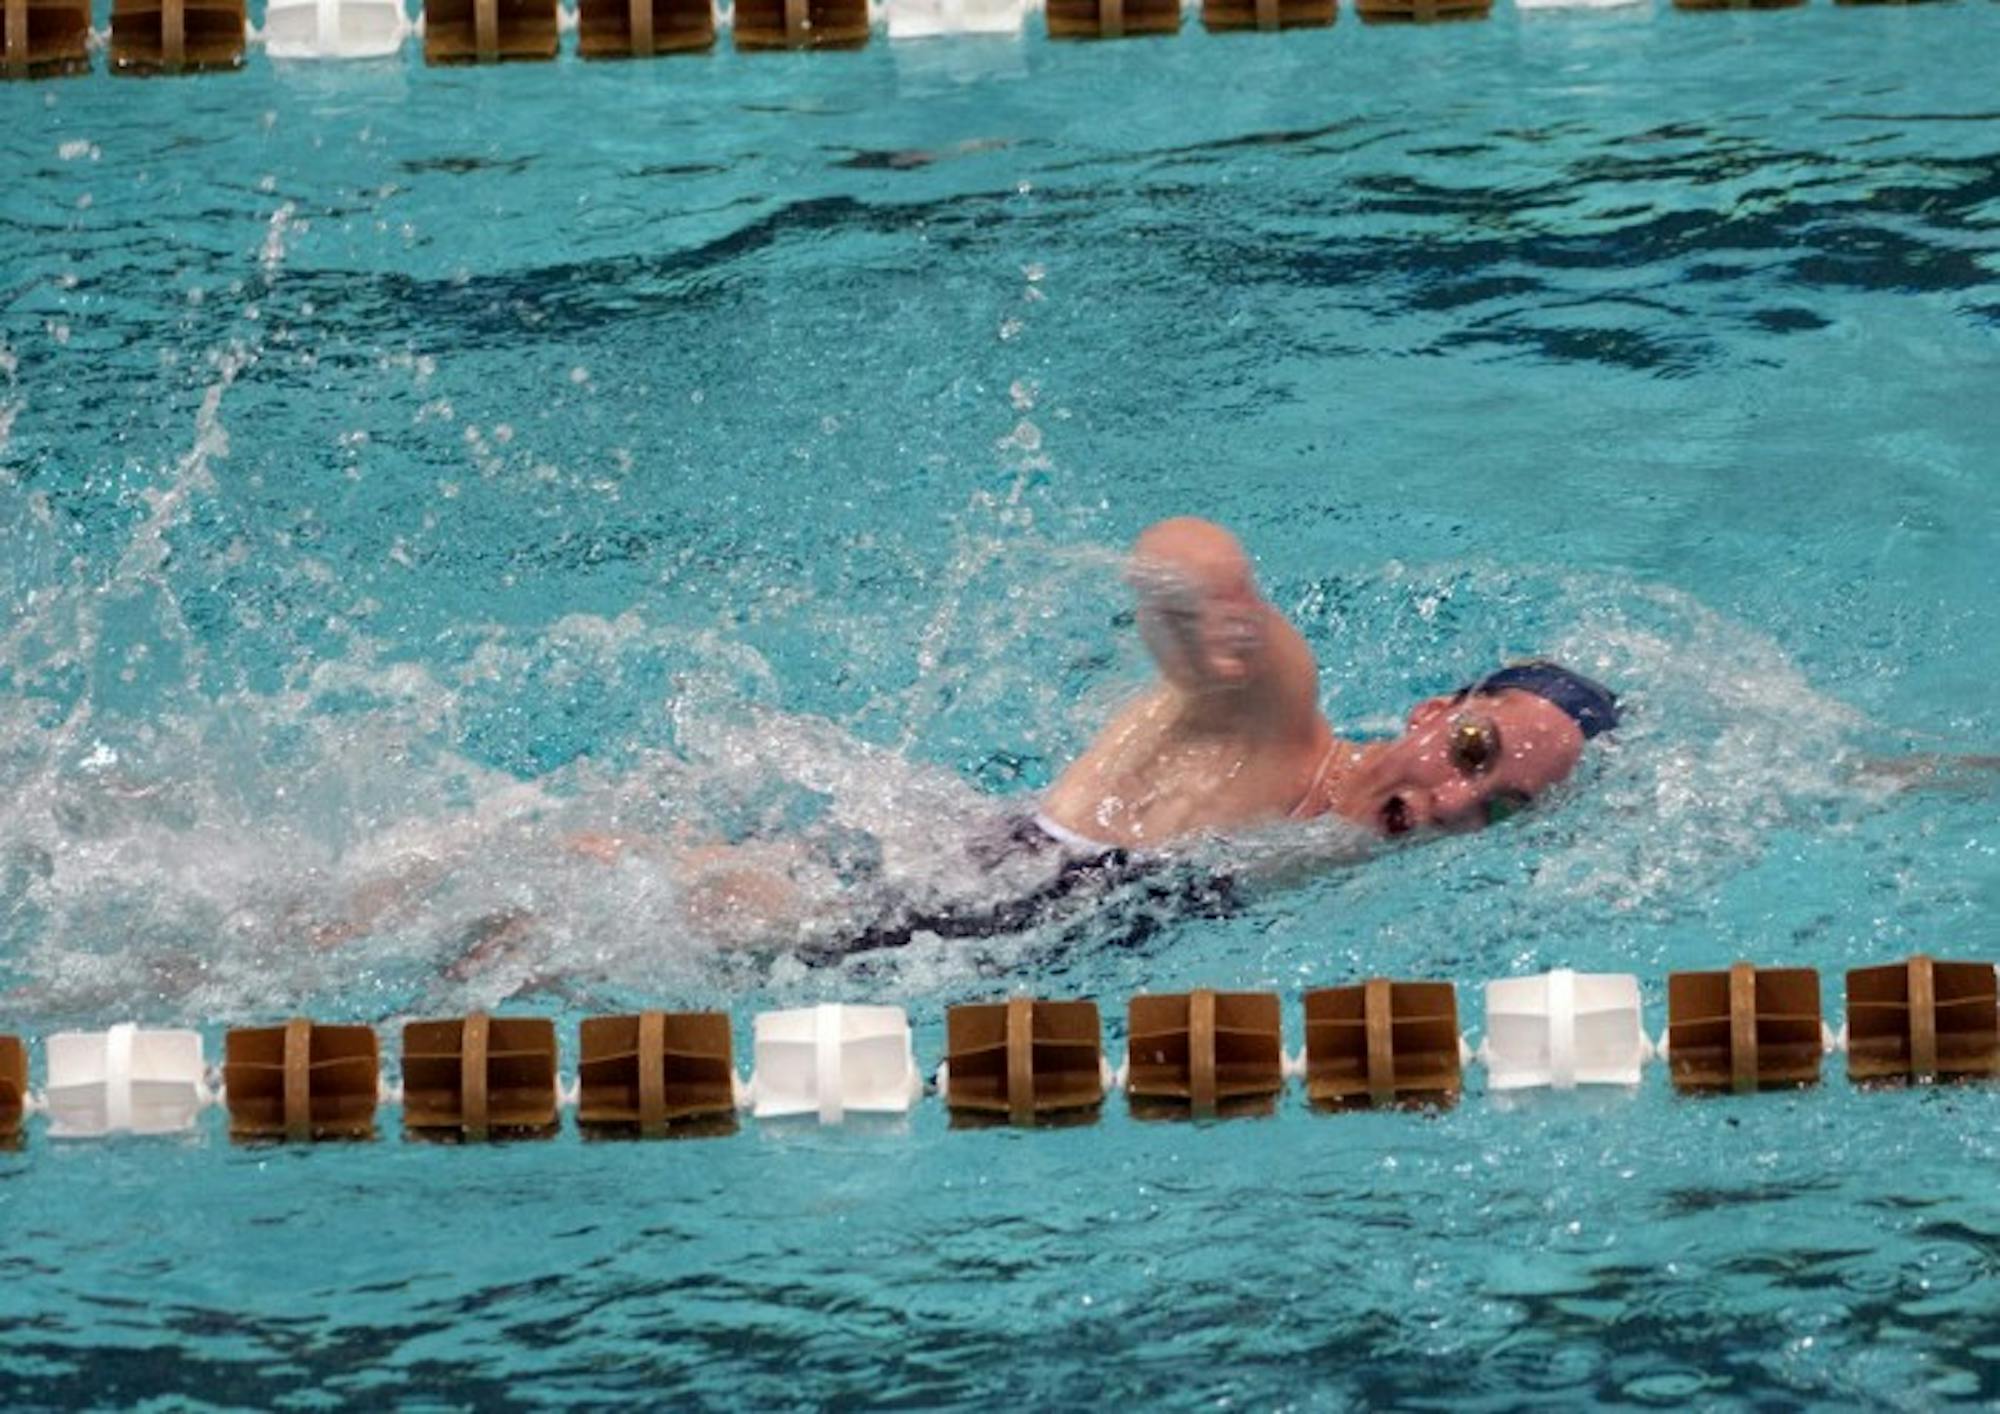 Senior Erin Foley swims the 200-meter freestyle during a win over Valparaiso at Rolfs Aquatic Center on Nov. 15, 2013.